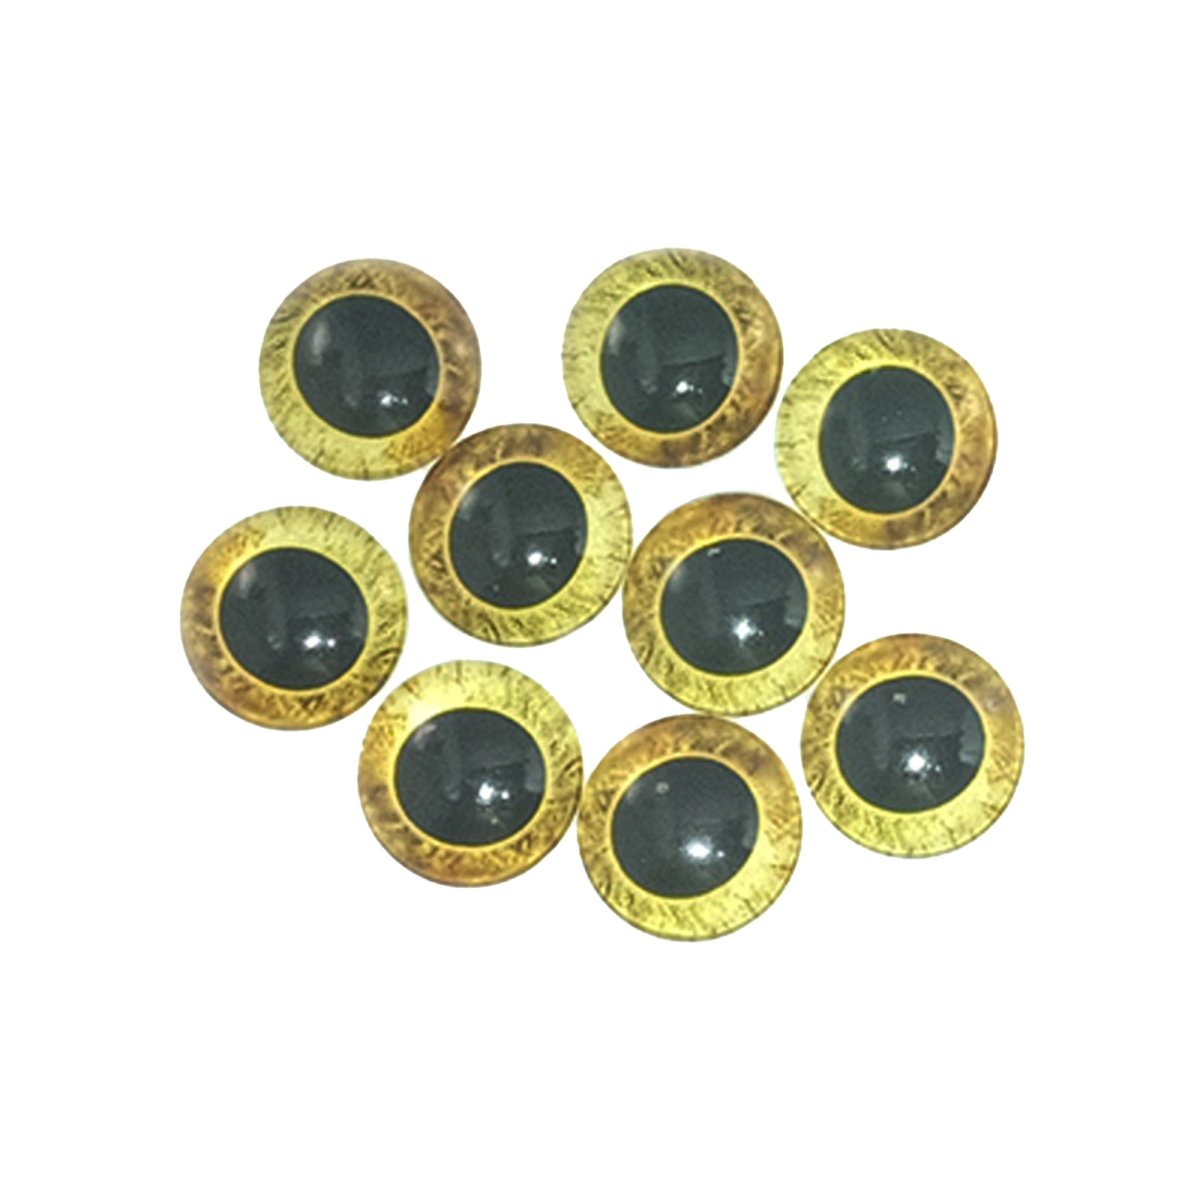 10-40pcs 20mm Doll Owl Animal Glass Eyes Large Pupils Glass Cabochon - 10 - Yellow - Asia Sell